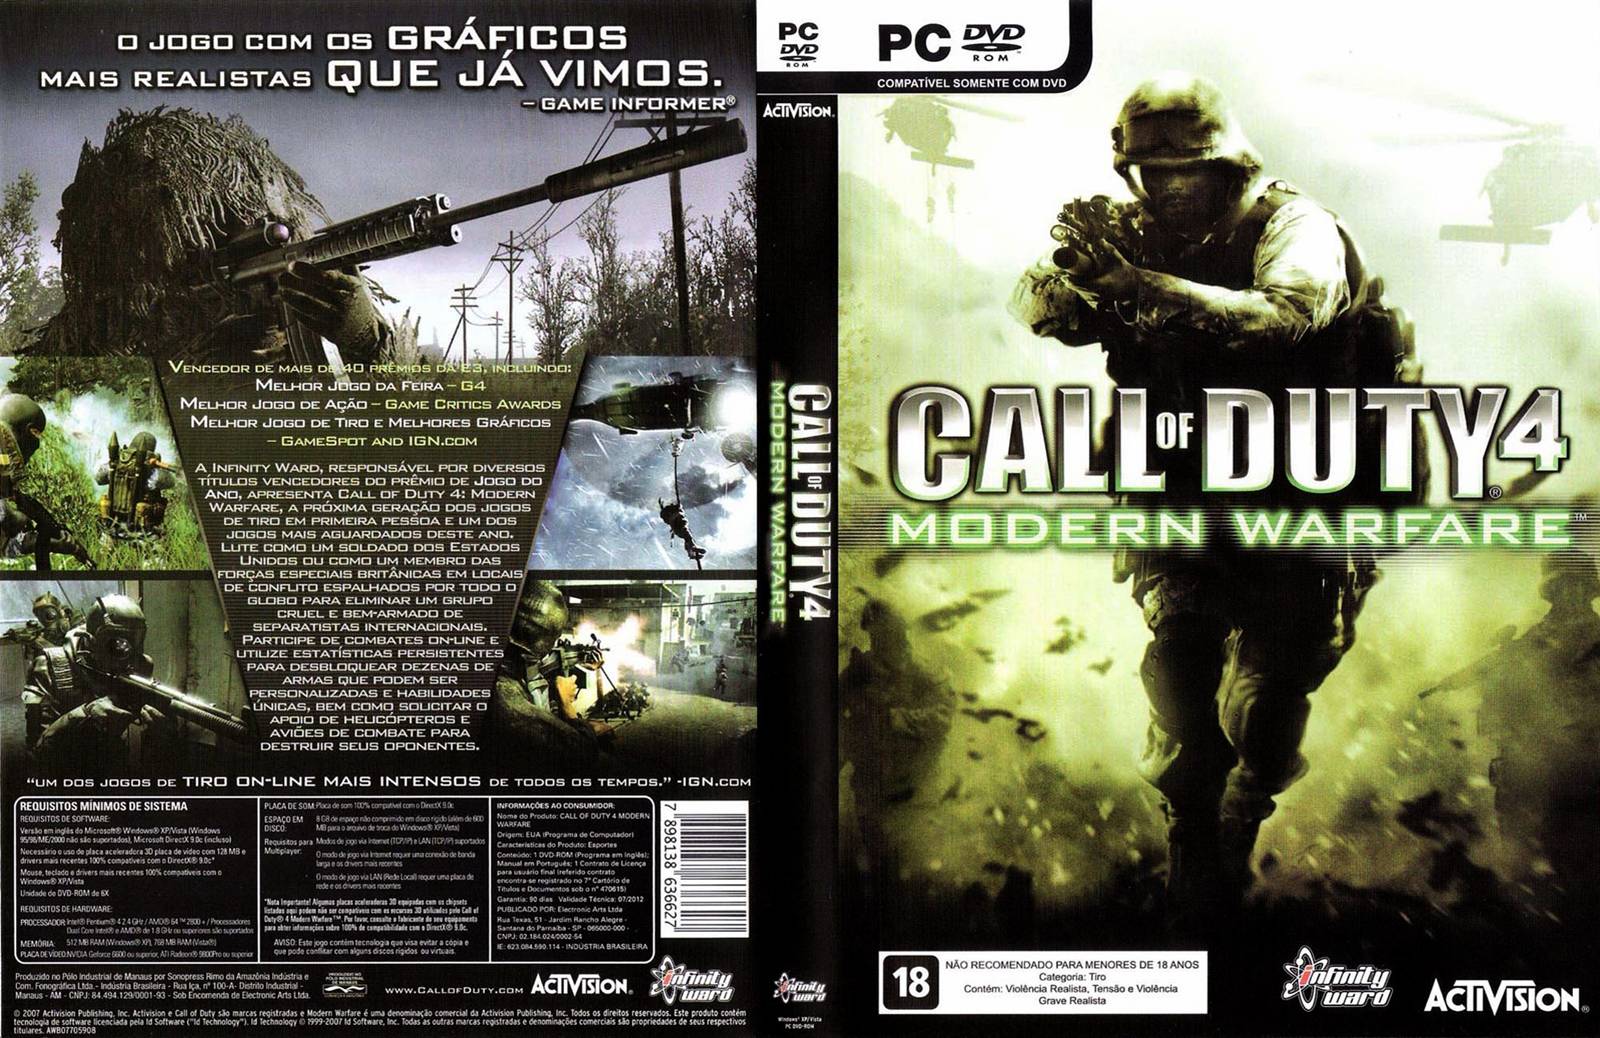 Download Multiplayer Crack For Call Of Duty 4 Modern Warfare